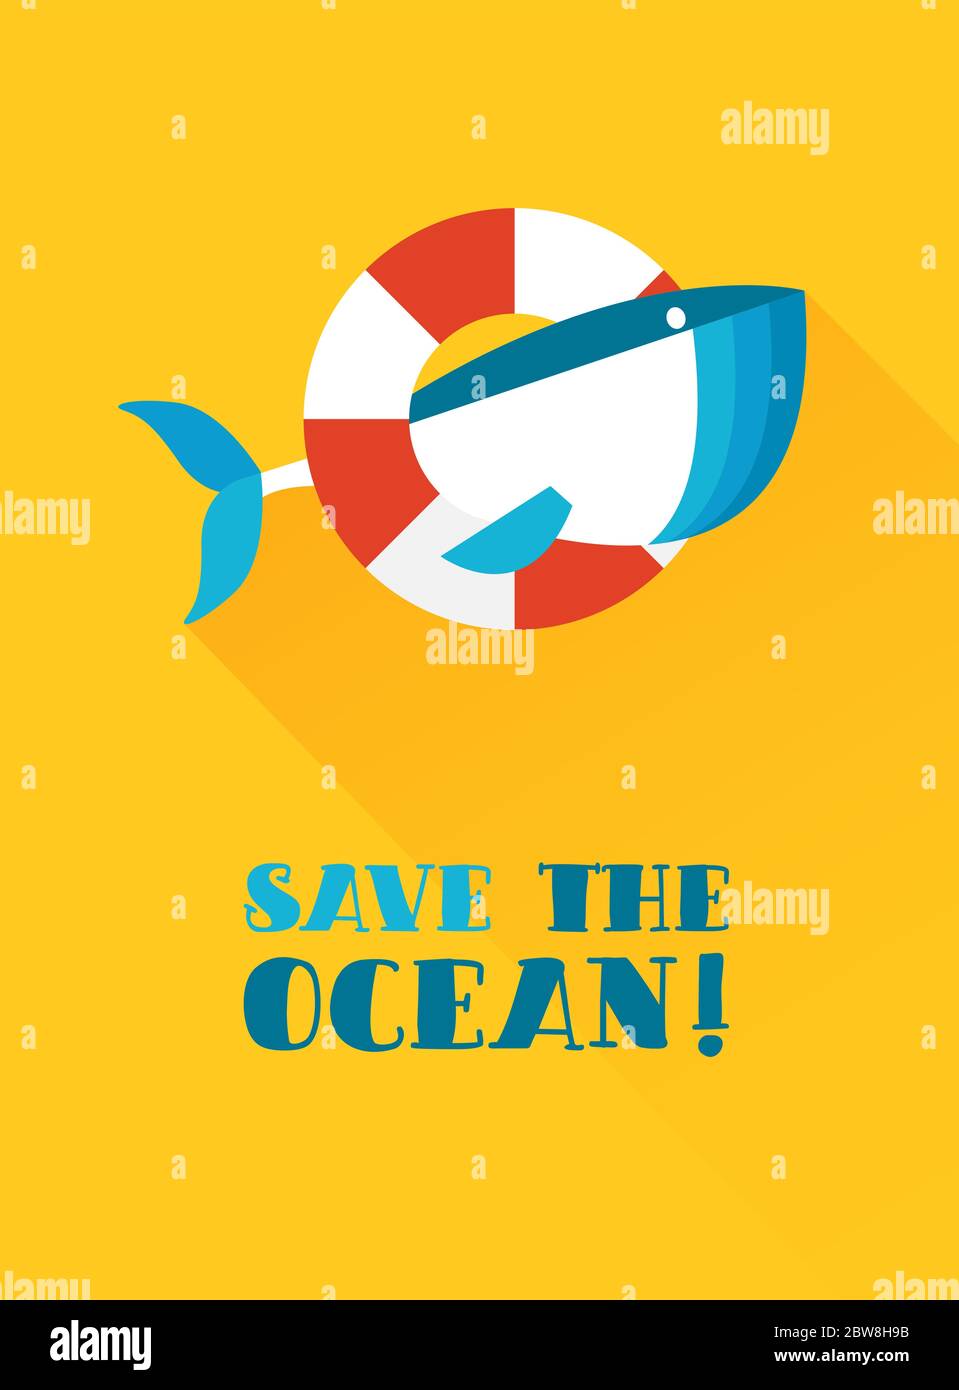 Text Save the Ocean! Whale with red and white Lifebuoy. Stock Vector